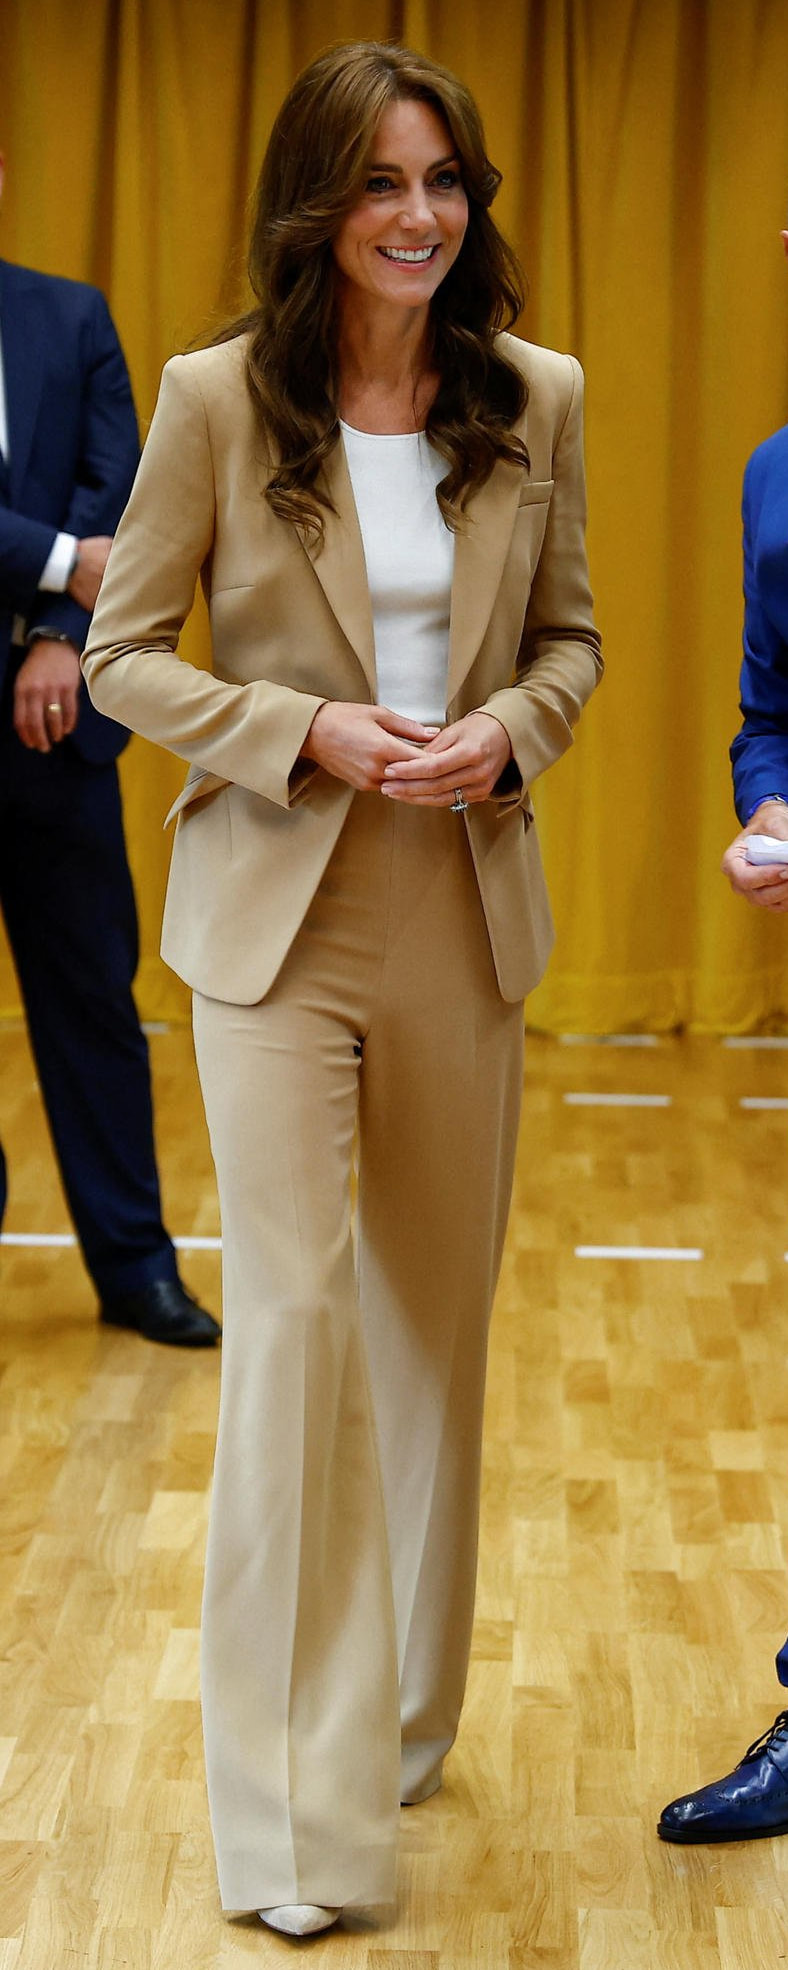 Roland Mouret Single-Breasted Stretch-Cady Blazer in Sand as seen on Kate Middleton, Princess of Wales.